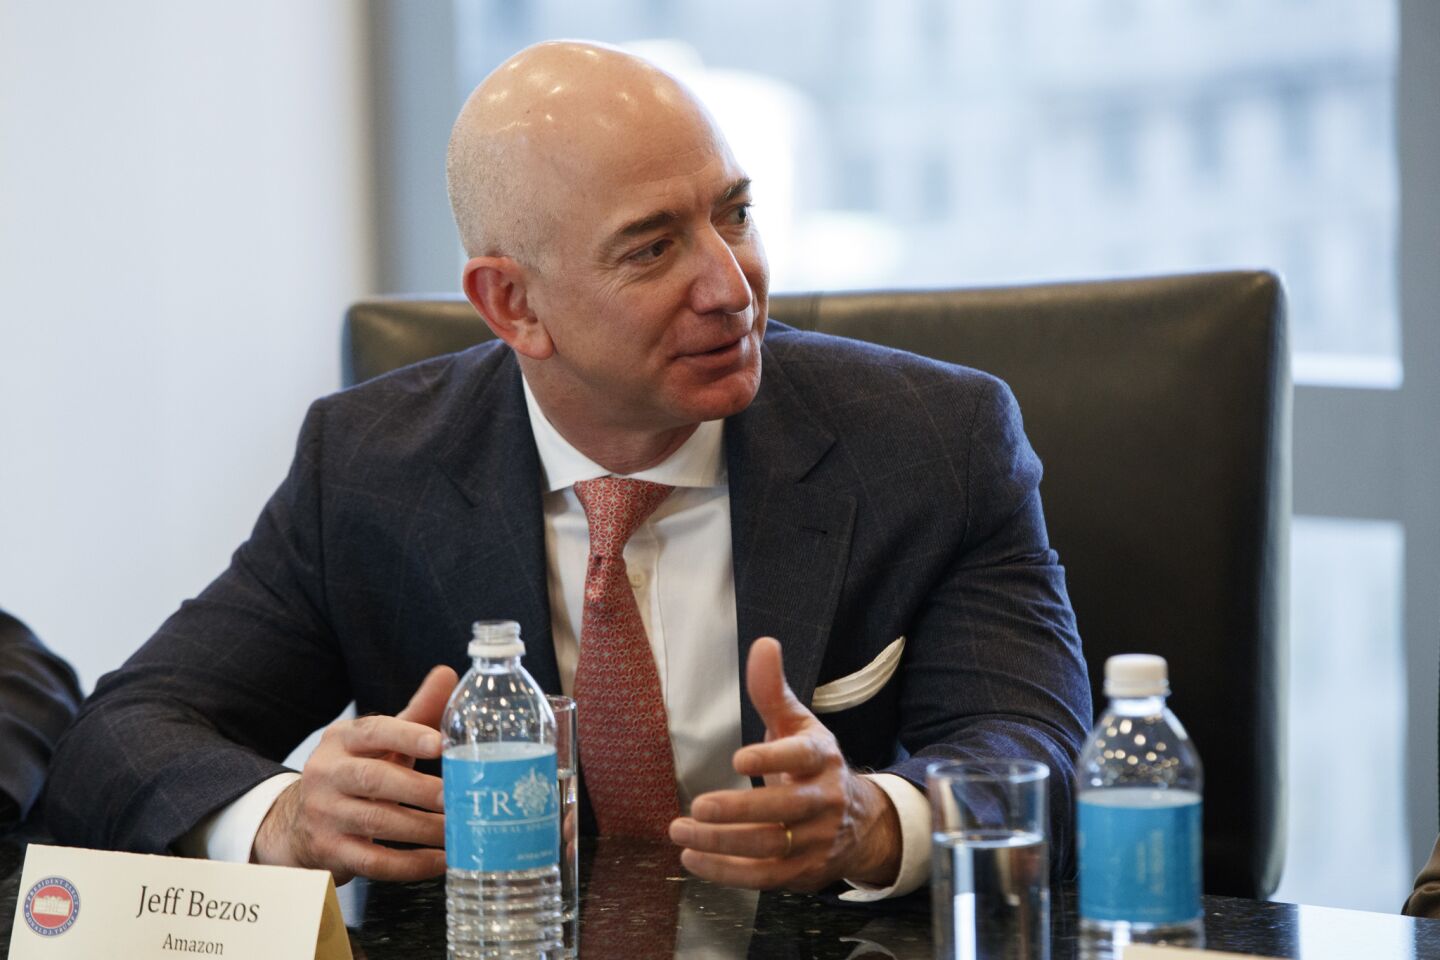 Amazon founder Jeff Bezos speaks during a meeting with President-elect Donald Trump and technology industry leaders at Trump Tower in New York, Wednesday, Dec. 14, 2016.